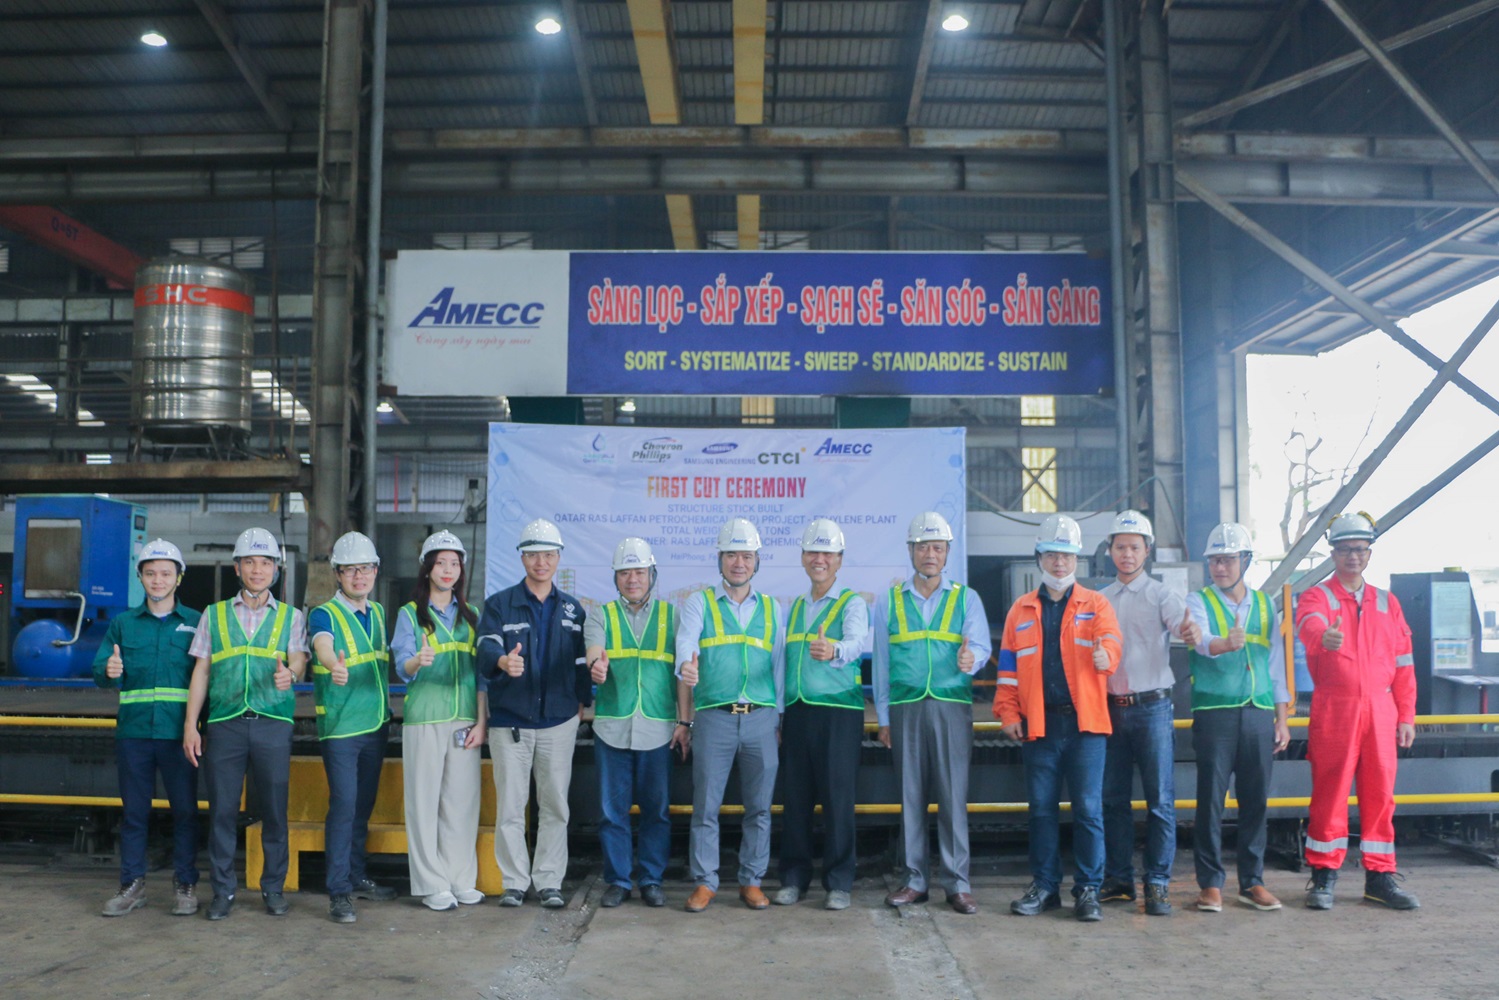 The First Cut ceremony at Amecc Plant - A milestone in the Ras Laffan Petrochemicals Project